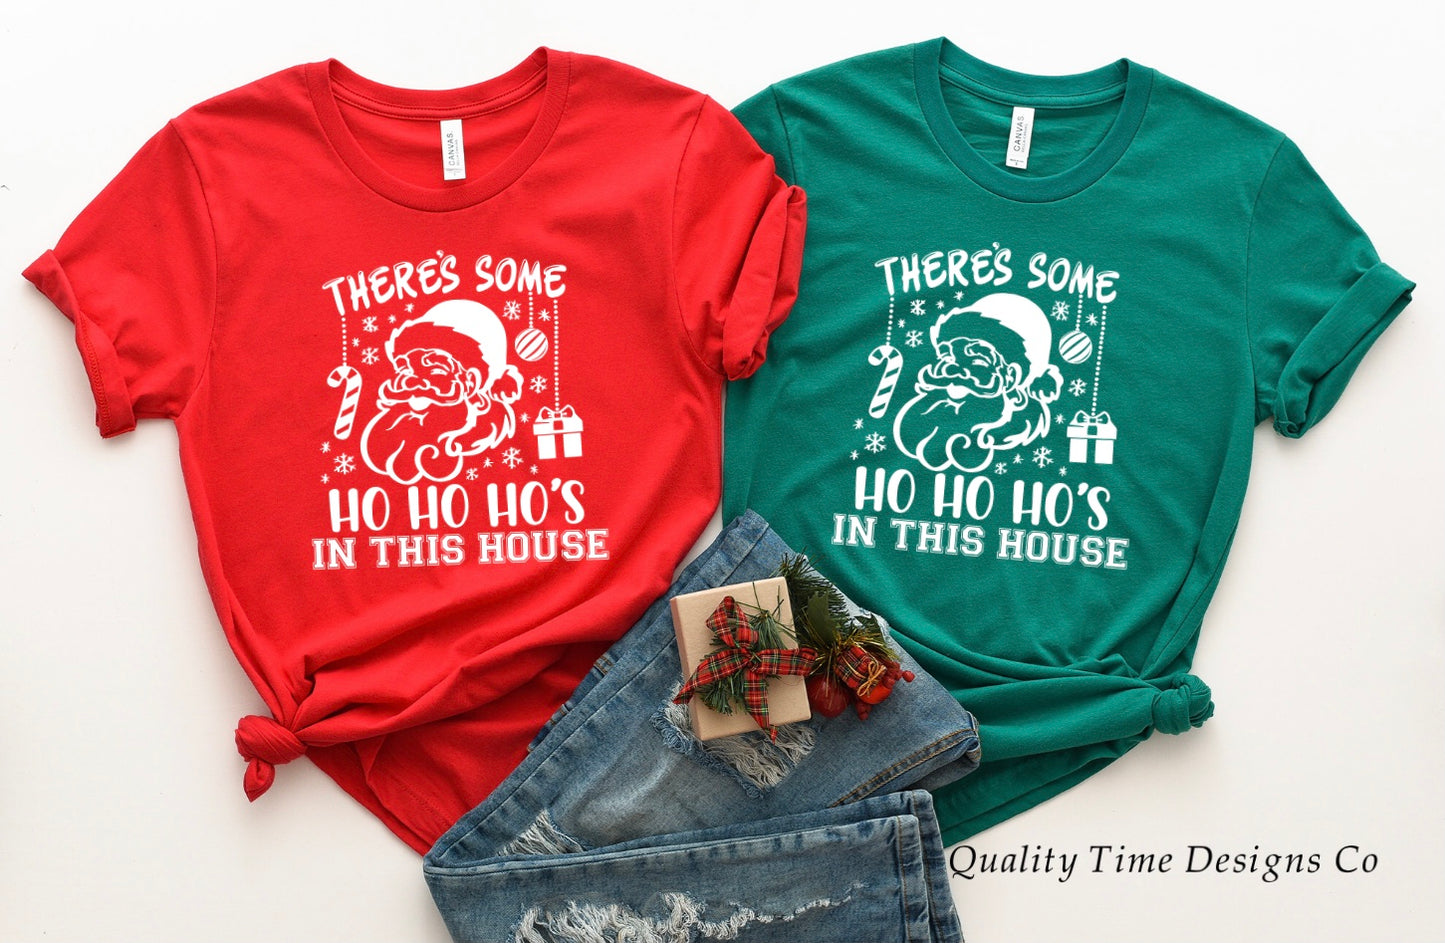 There’s some ho ho ho’s in this house t-shirt 